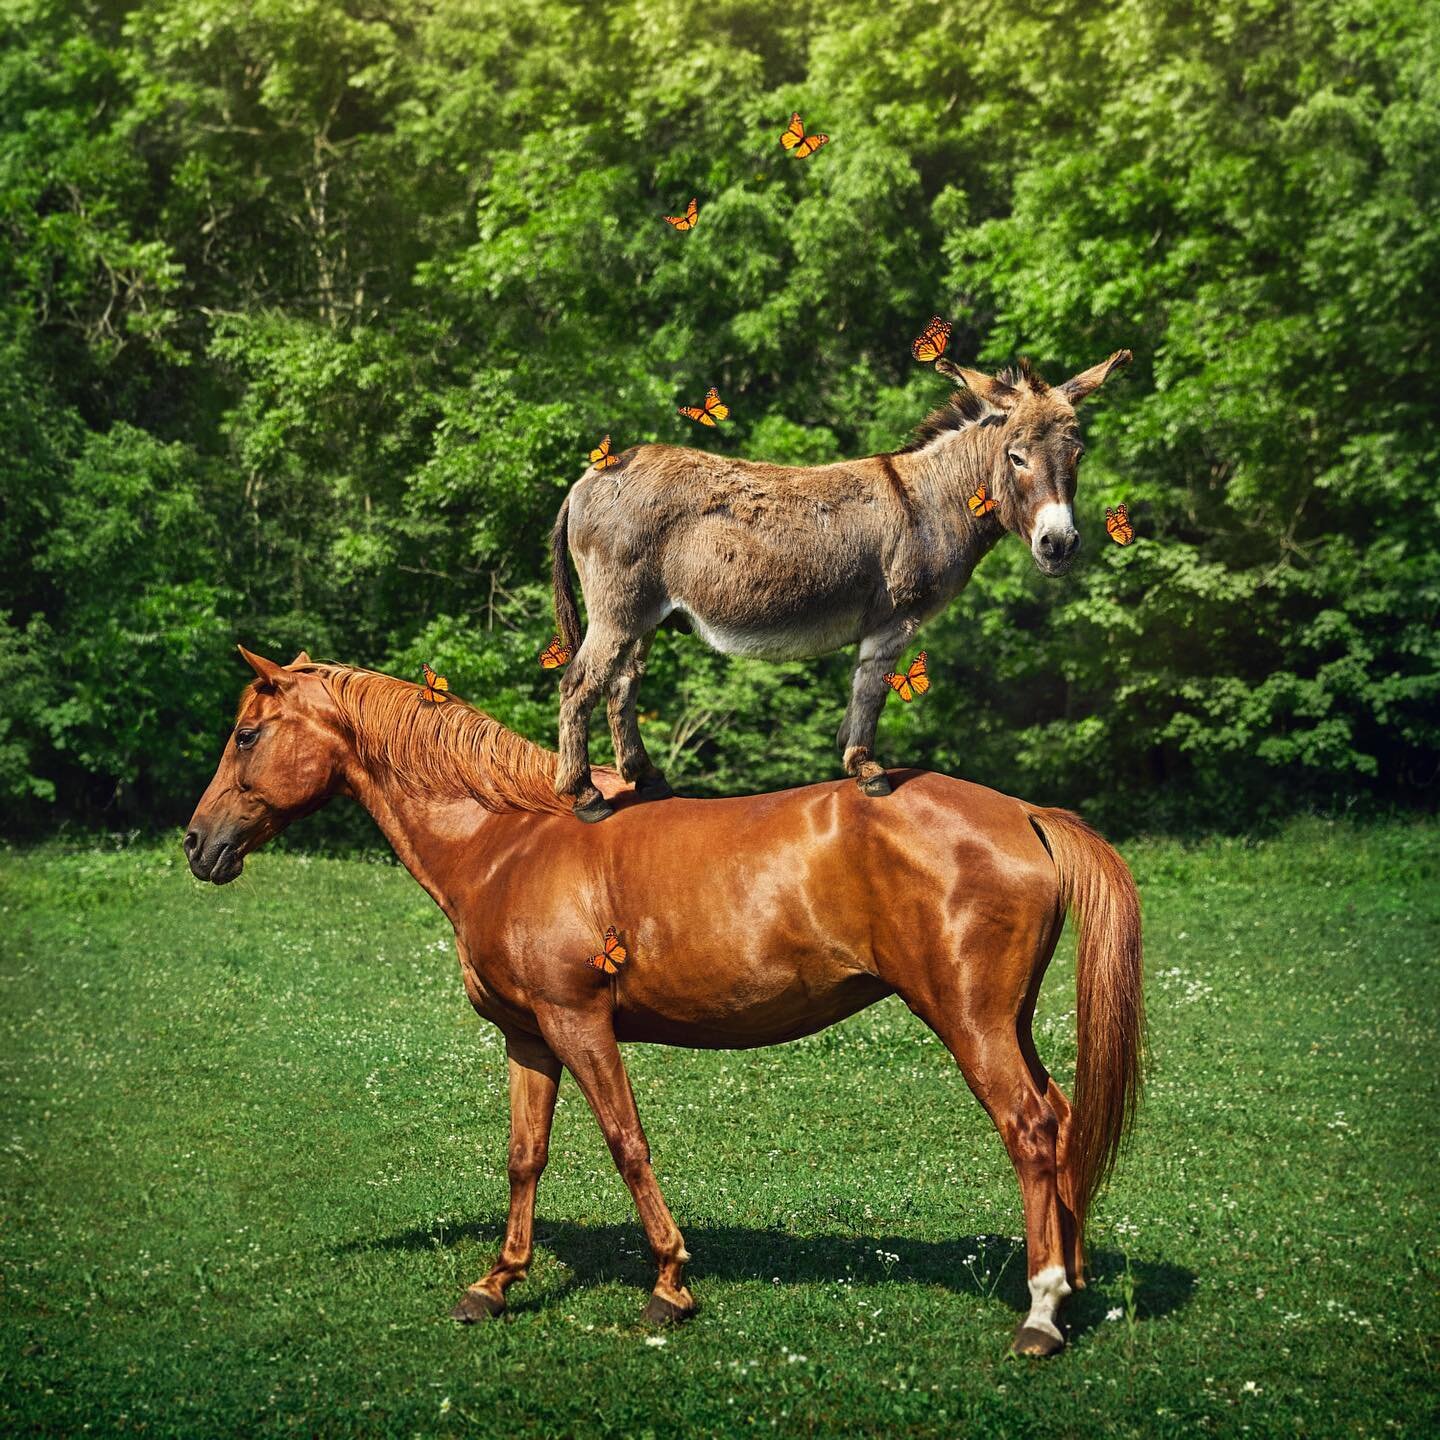 Cale and Auggie, friendship is a balancing act. #conceptualportrait #conceptualanimals #driftlesswisconsin #wisconsinphotographer #conceptualpetphotography